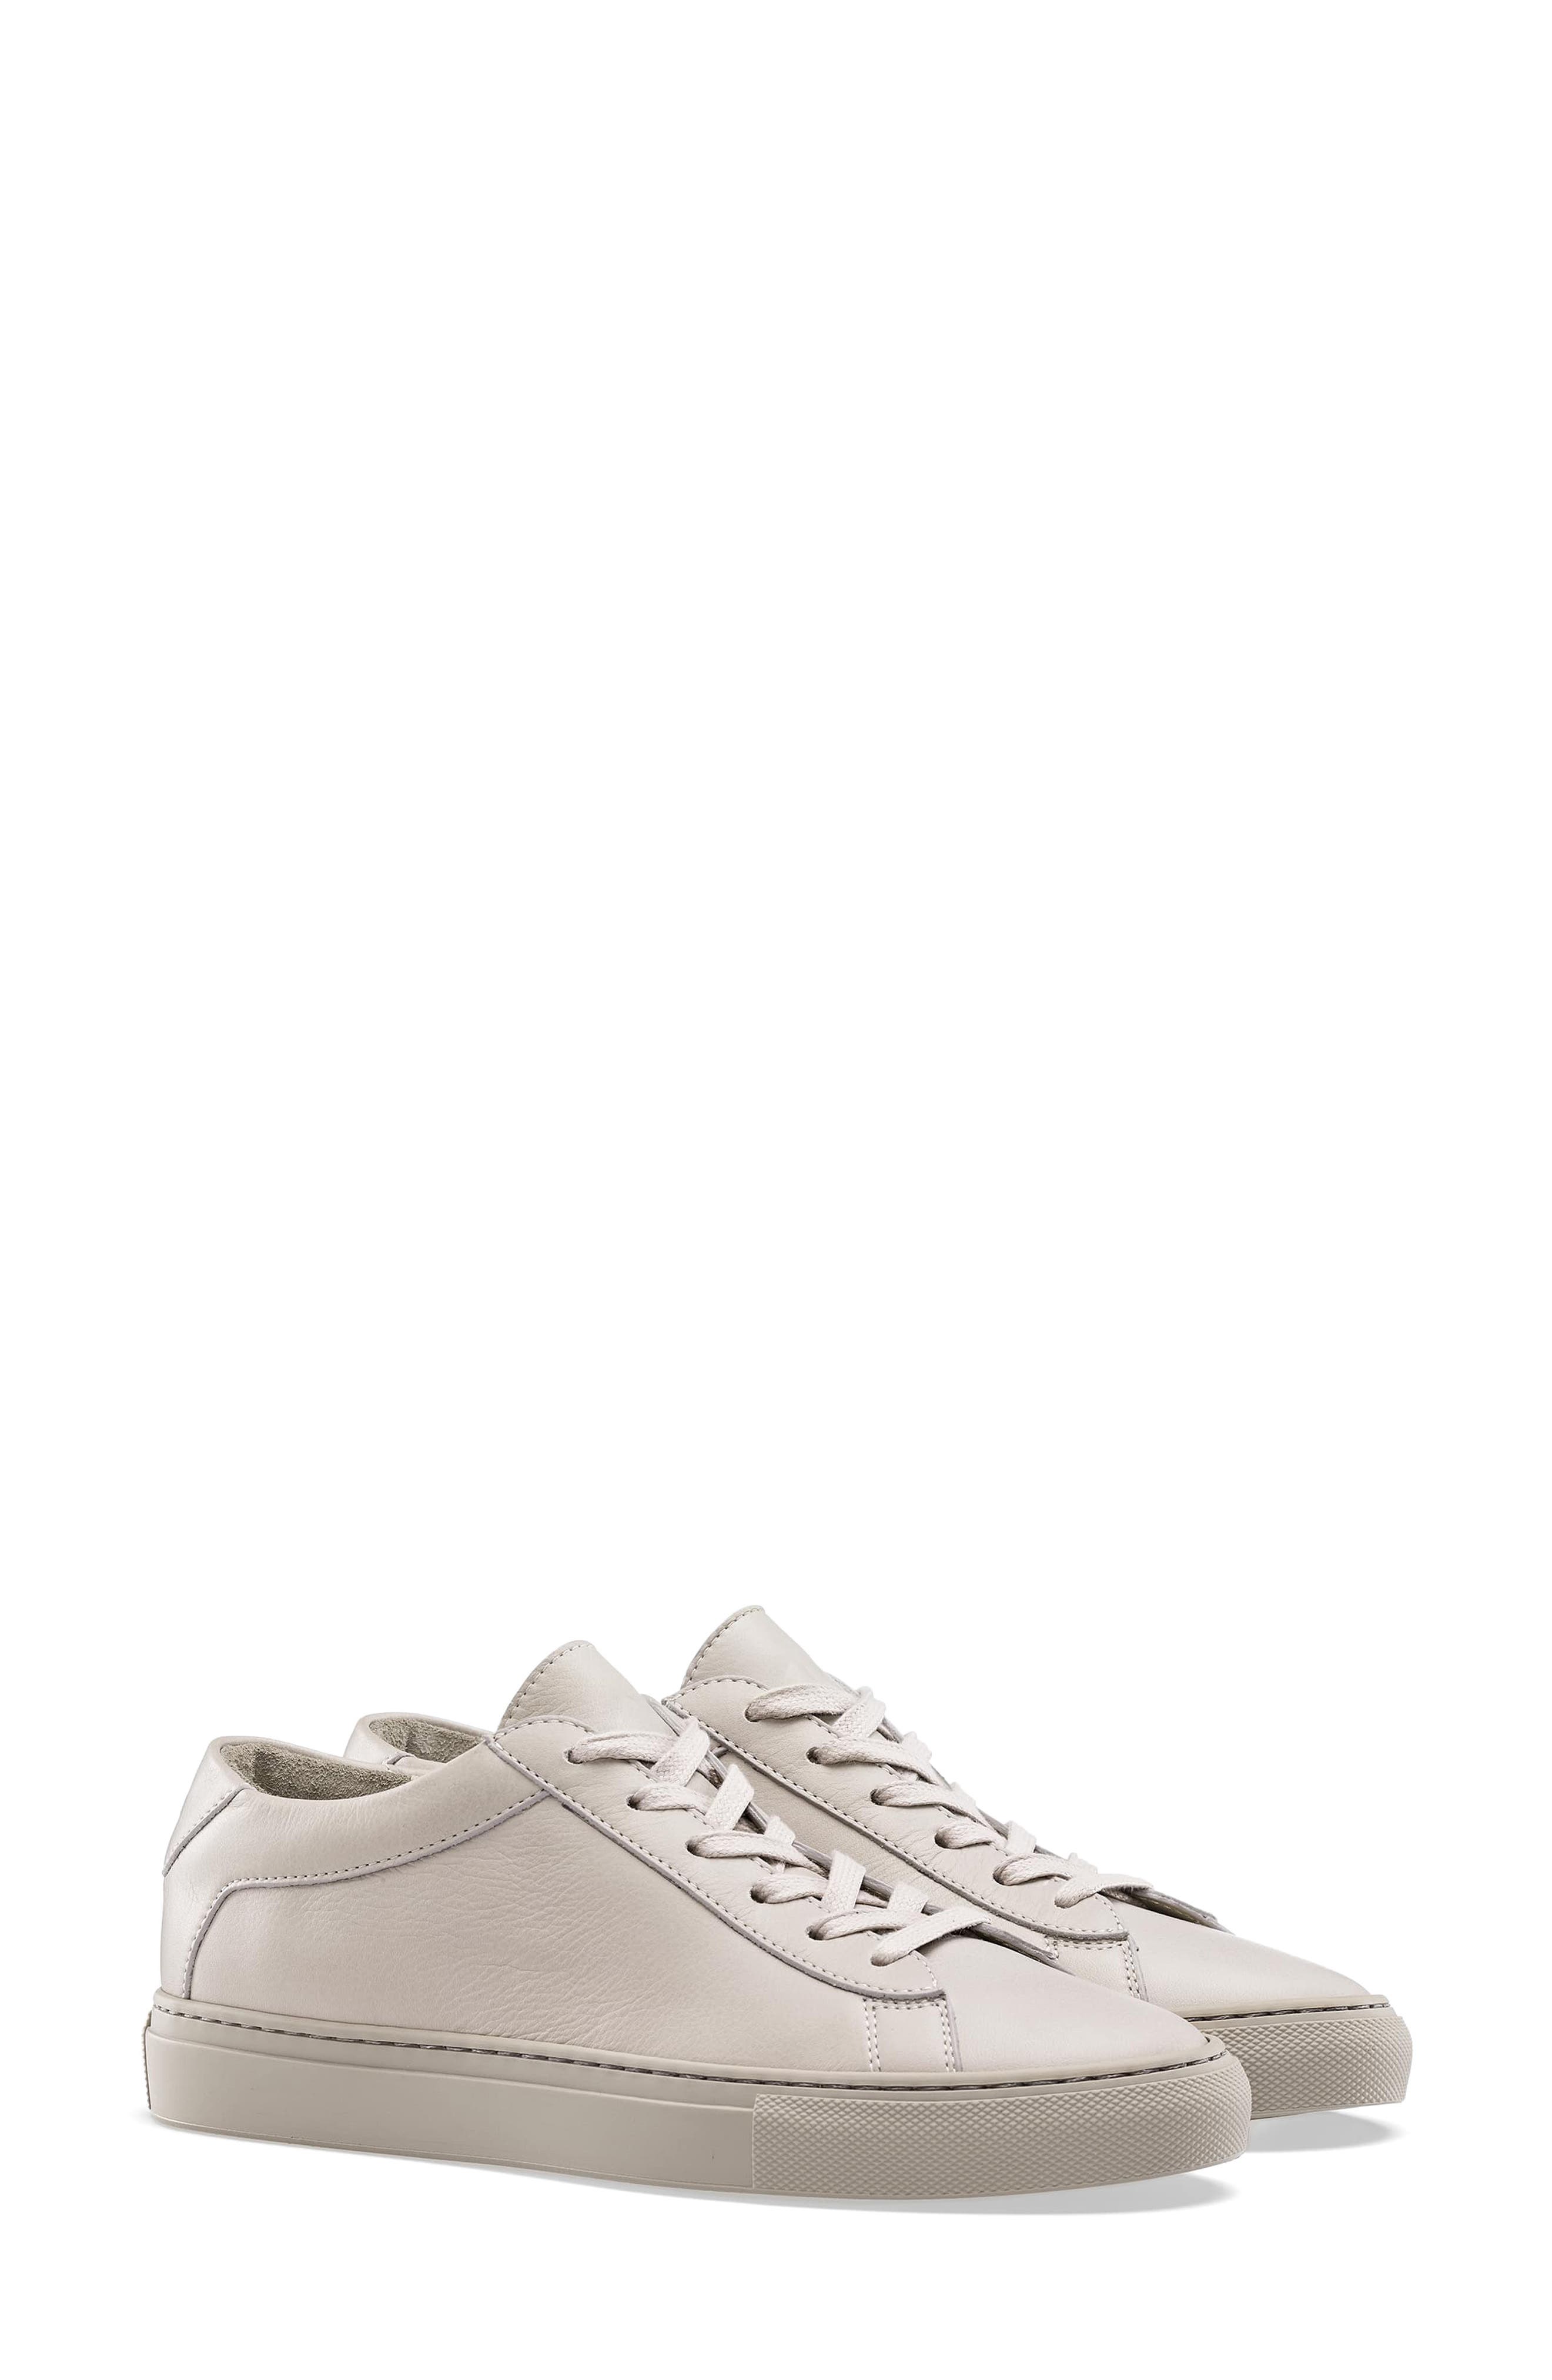 Women's Grey KOIO Shoes | Nordstrom